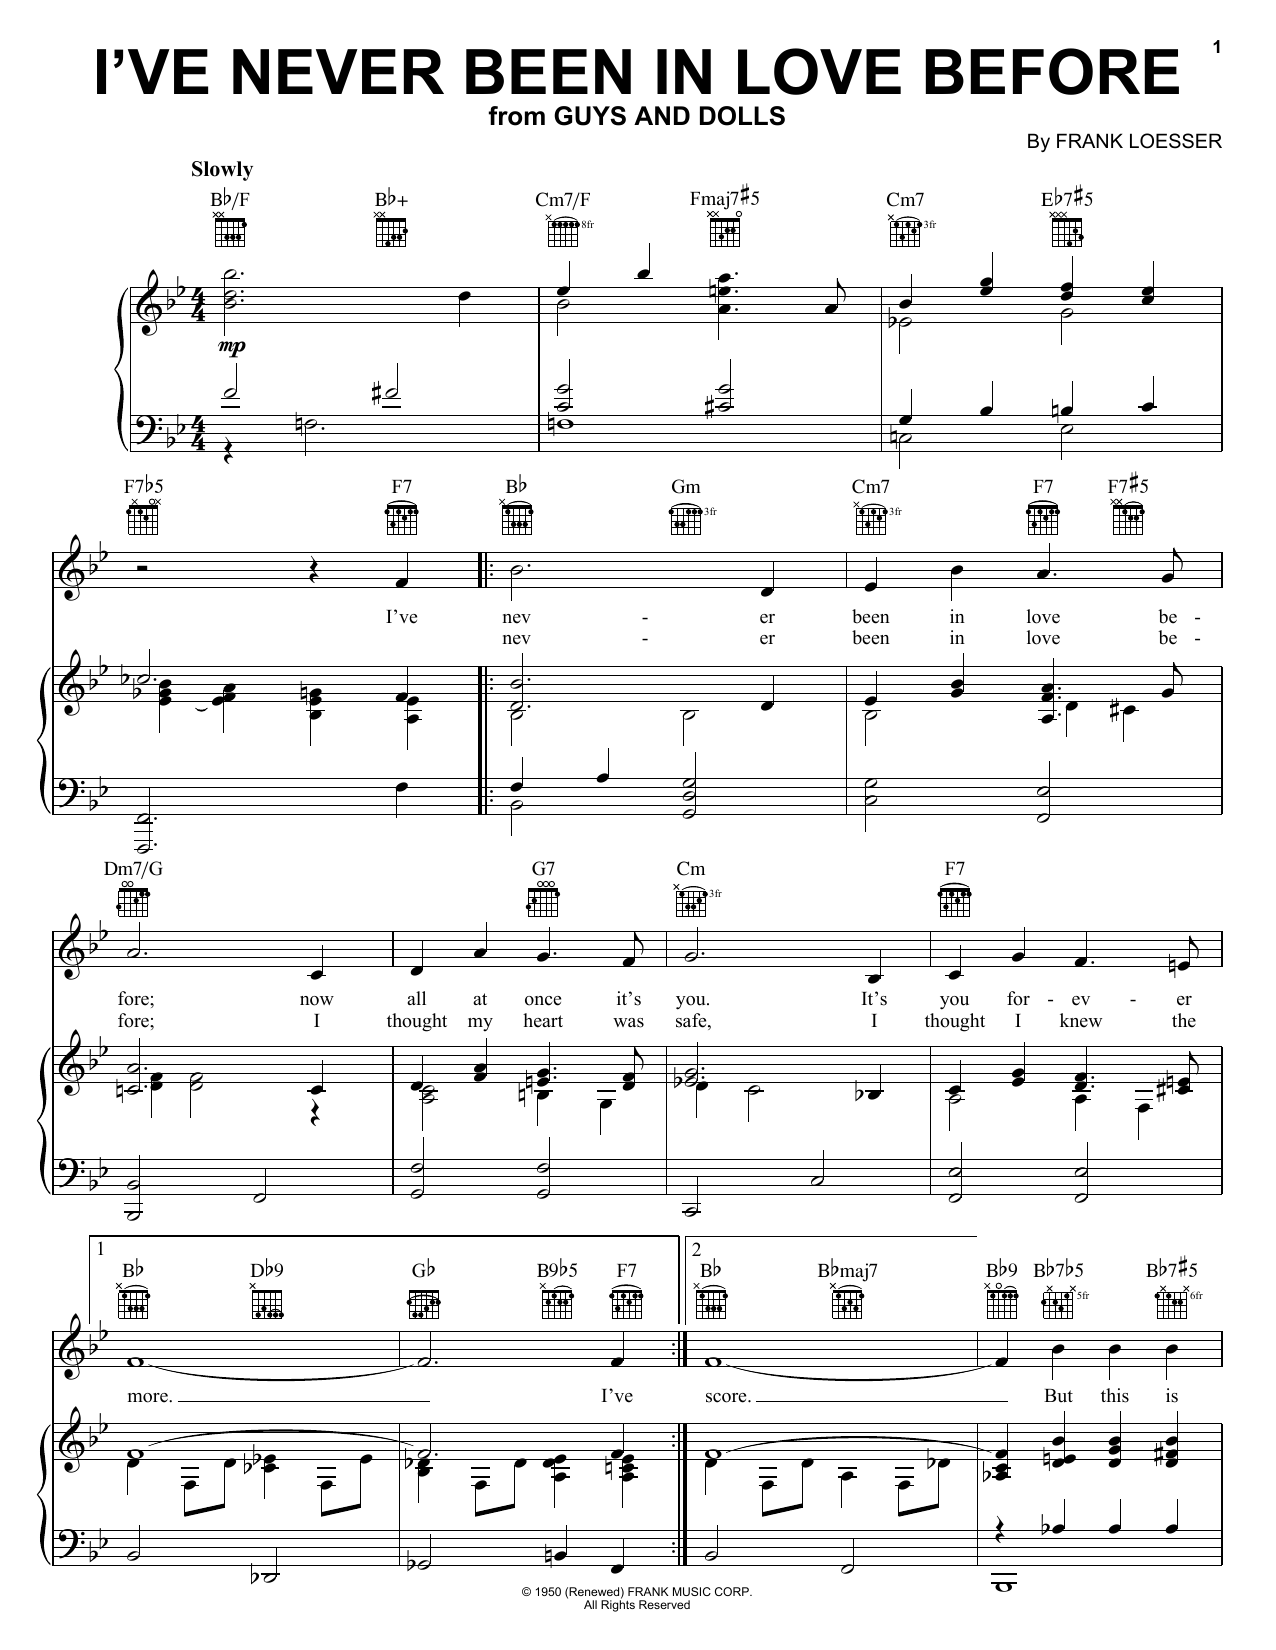 I've Never Been In Love Before sheet music